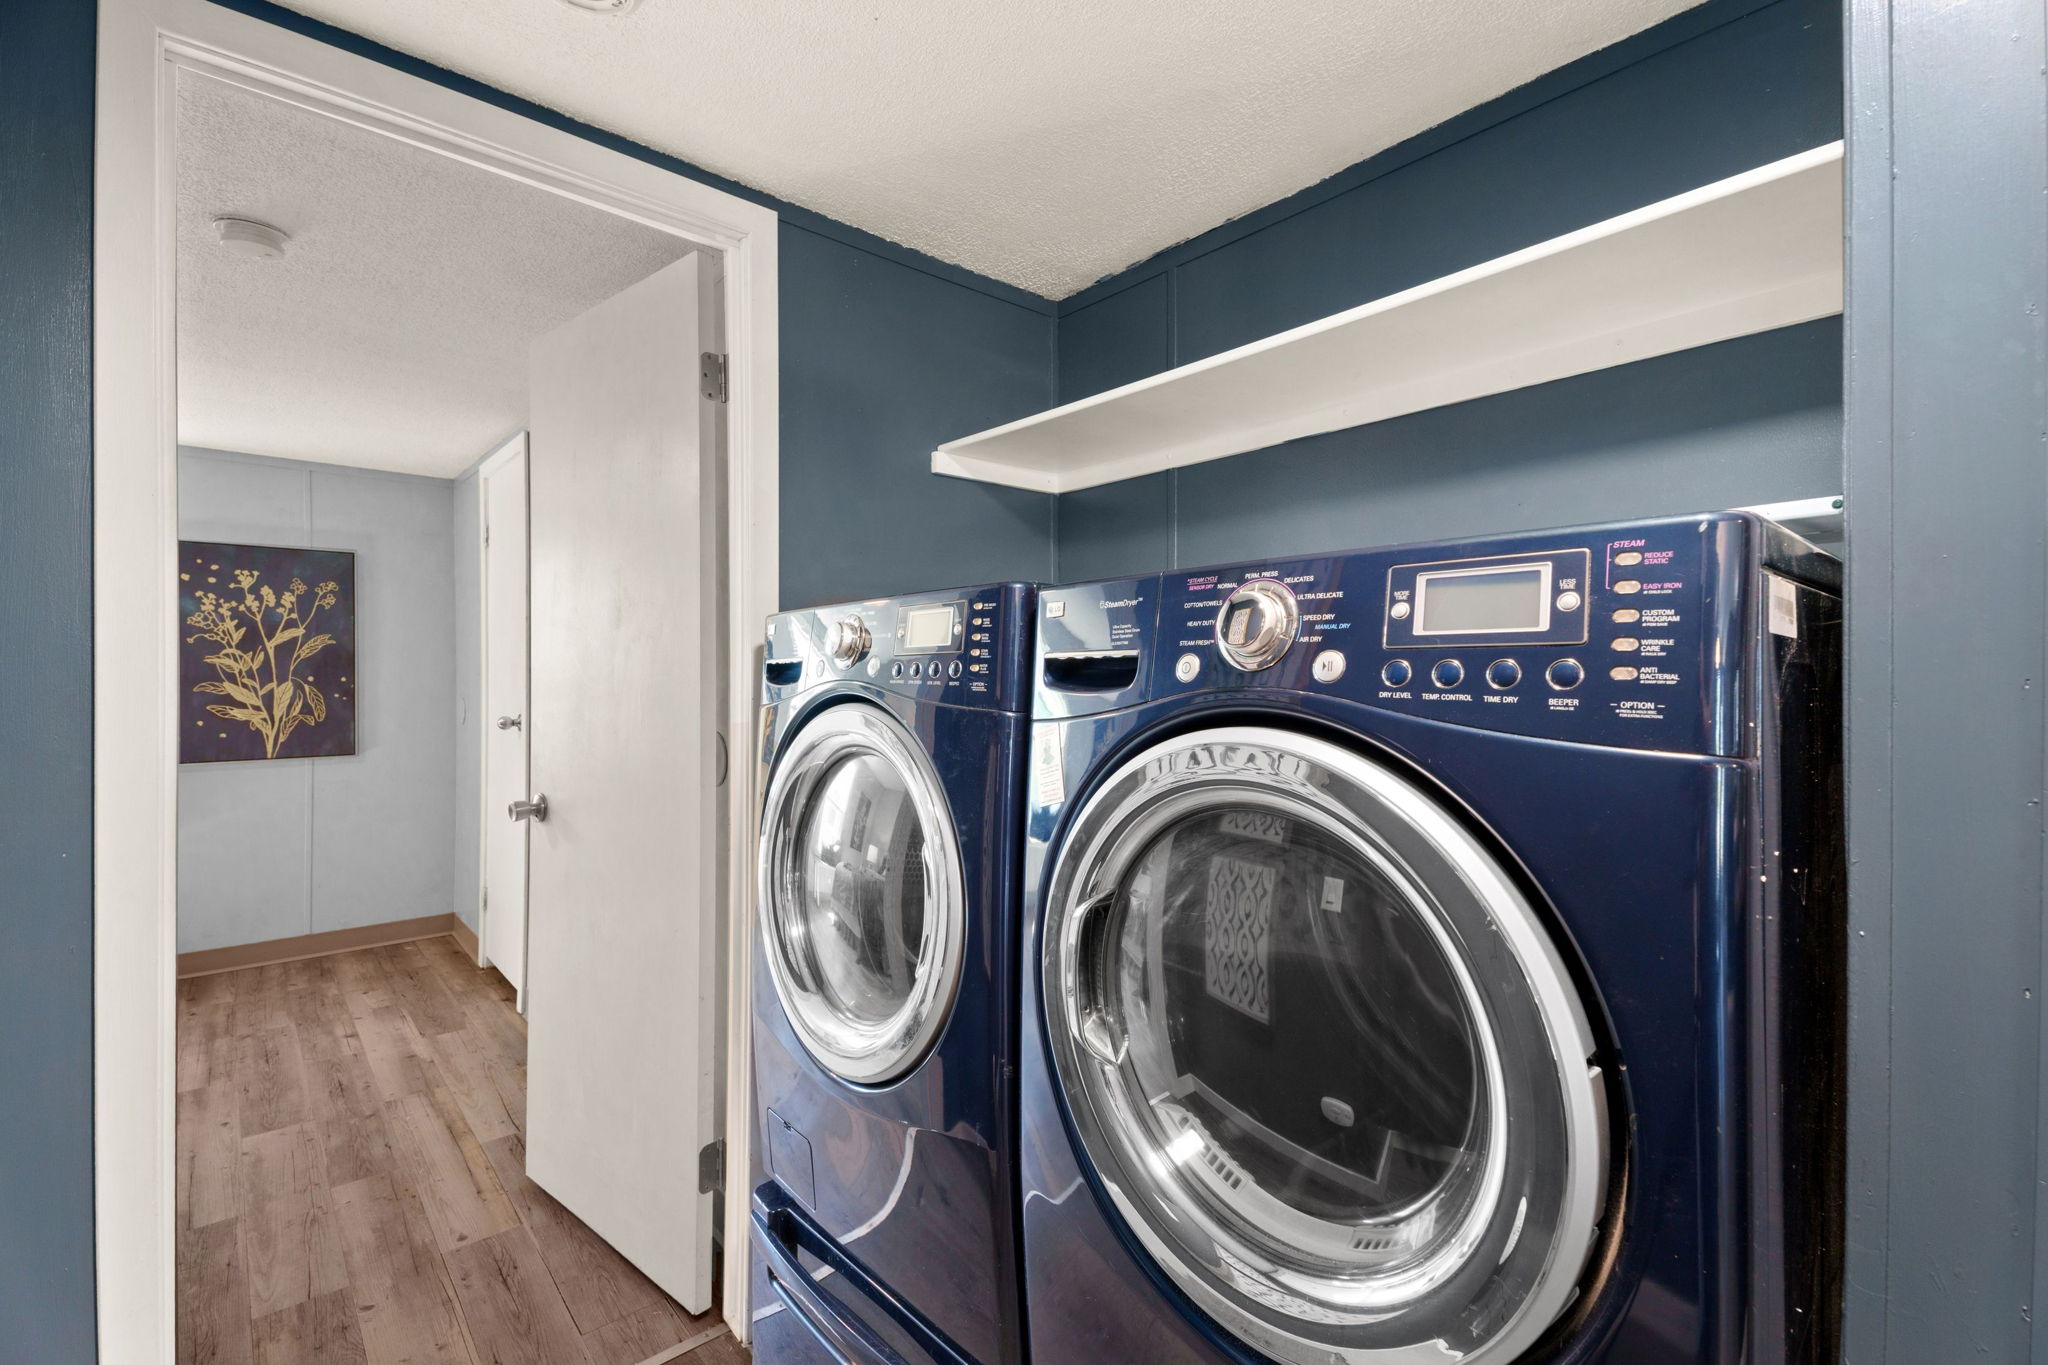 Washer and dryer included with purchase of the home.